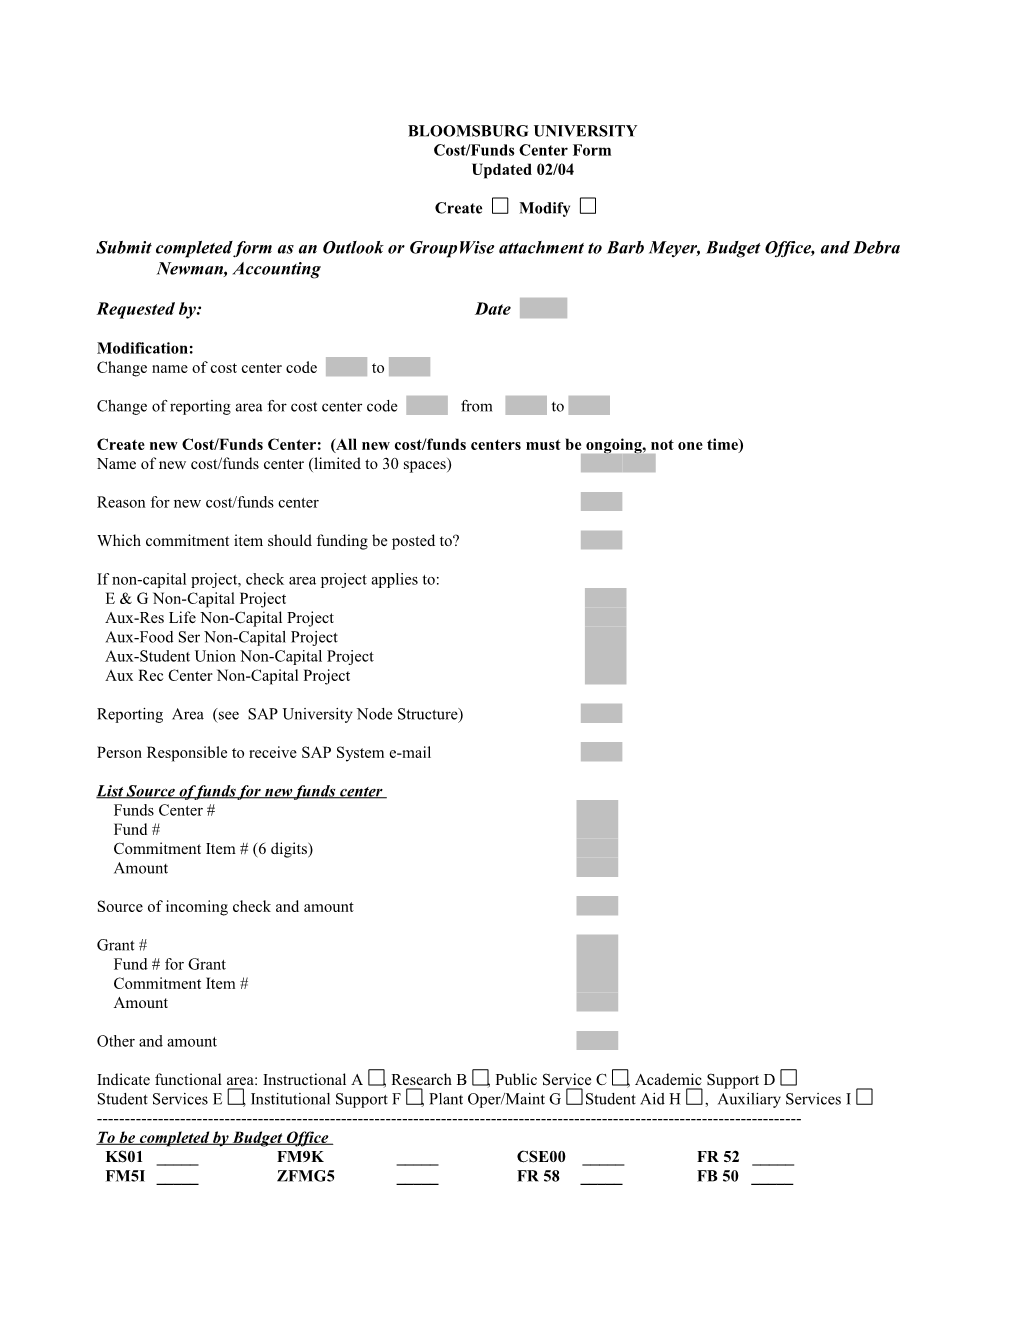 Cost/Funds Center Form s1